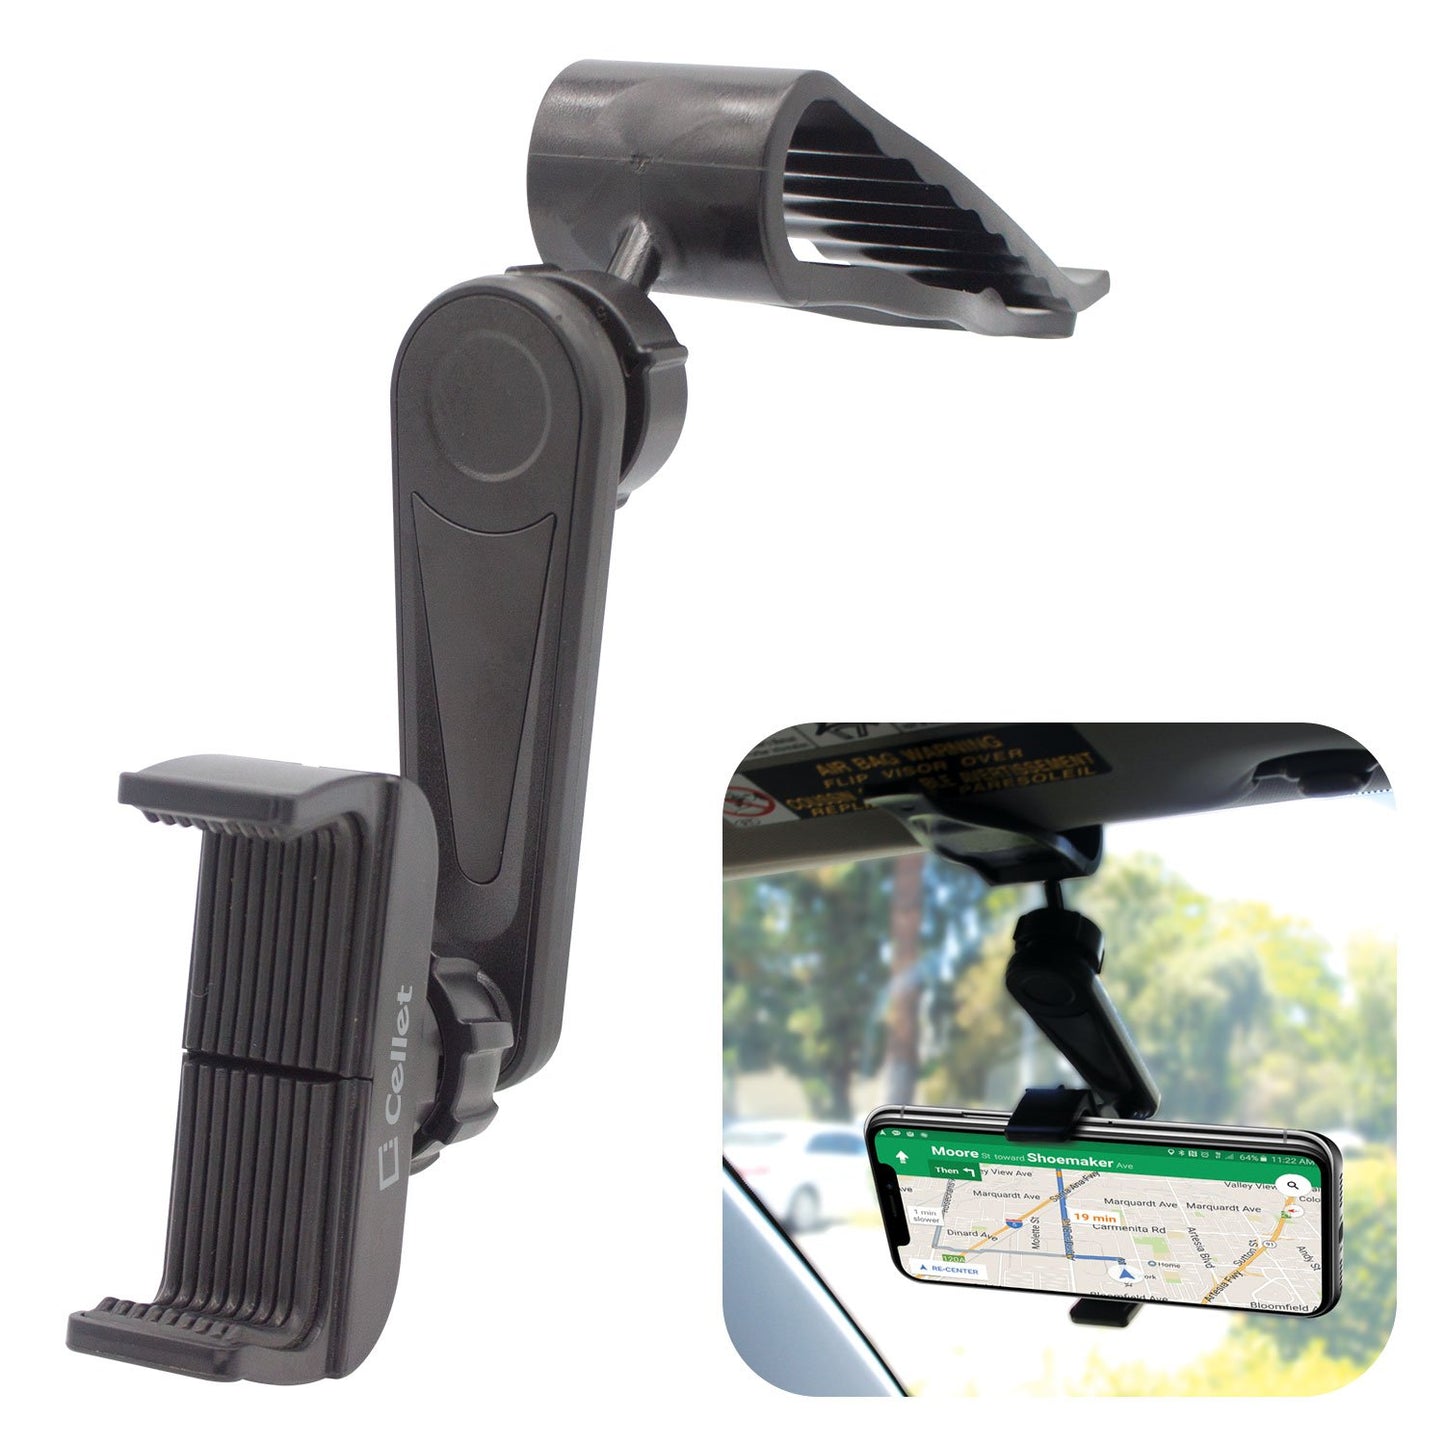 PH710 - Sun Visor Phone Mount, Sun Visor Clip Phone Mount Holder with 360 Degree Rotation Compatible to all Smartphones